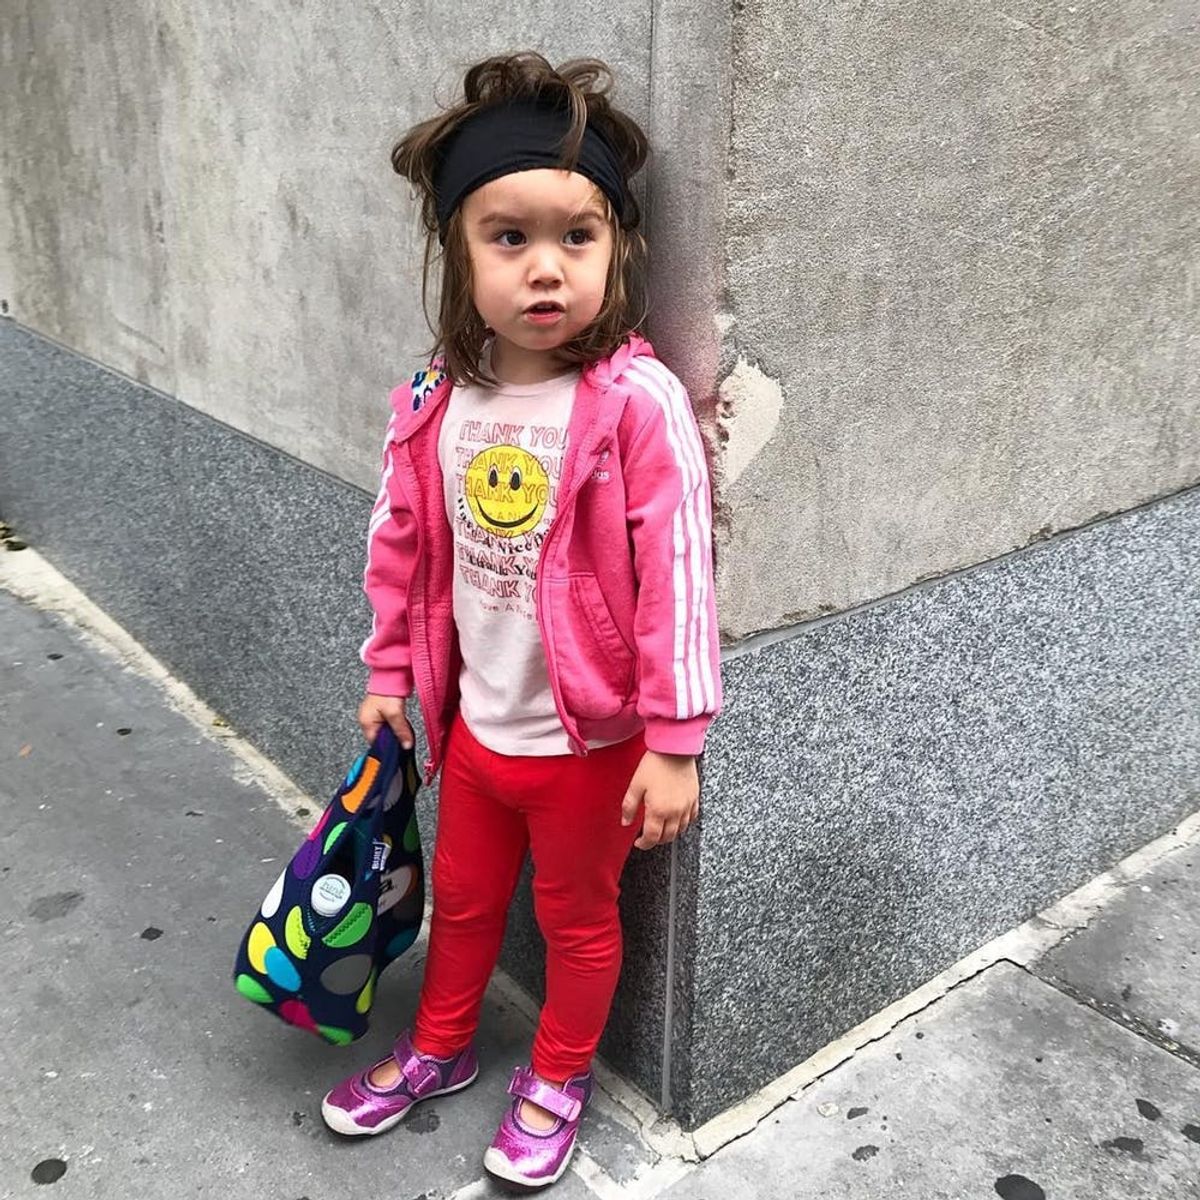 This Three-Year Old (Yes, Three) Fashionista Is Killing the #OOTD Game